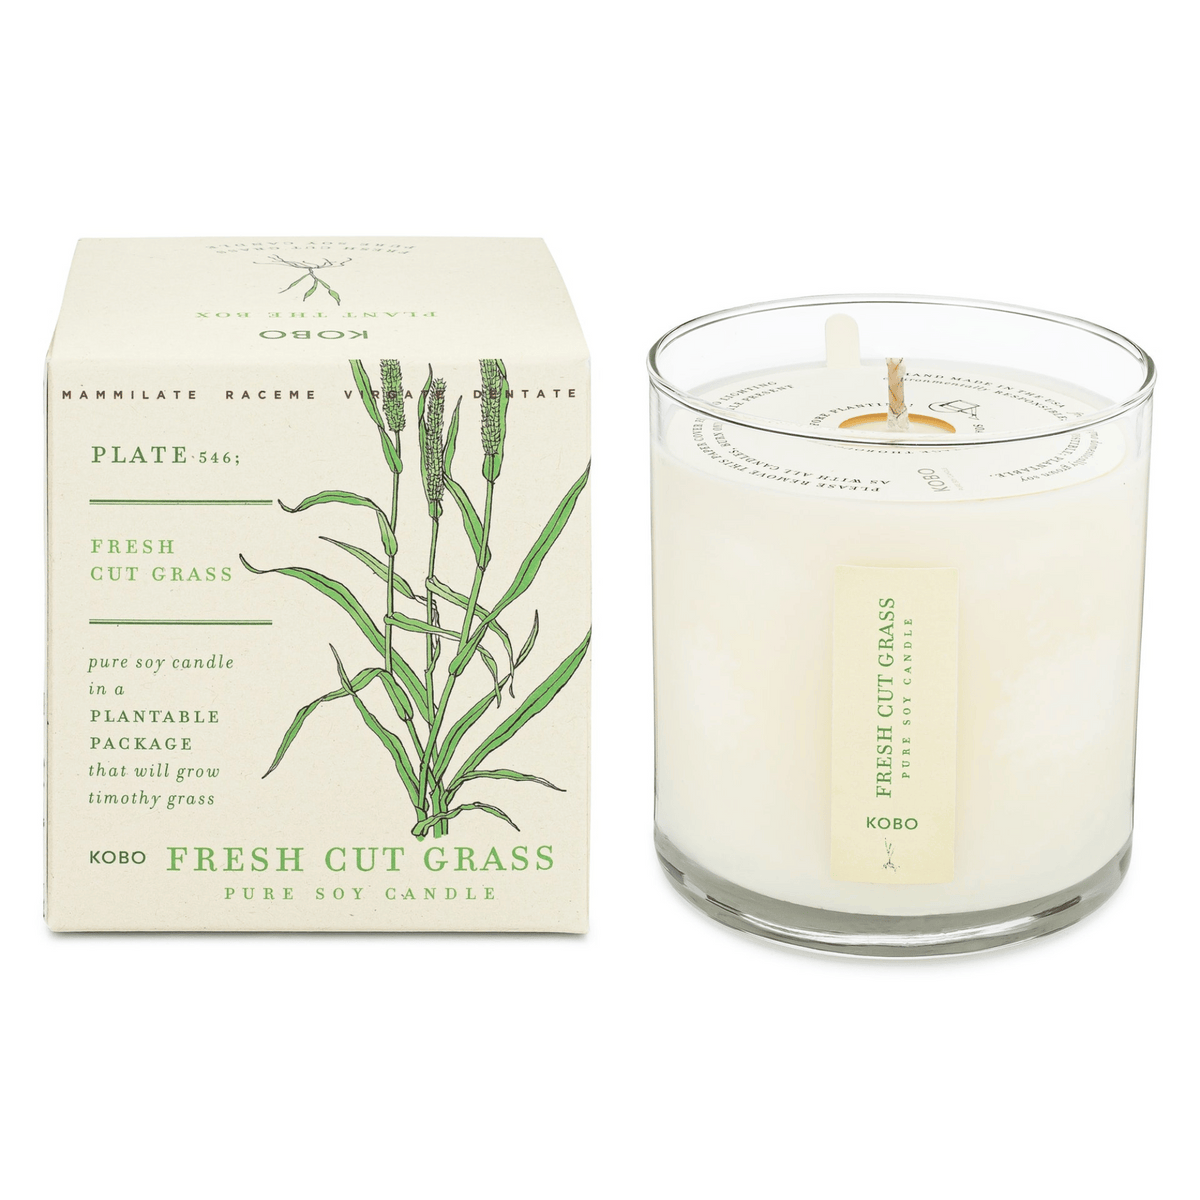 Primary Image of Fresh Cut Grass Plant the Box Candle